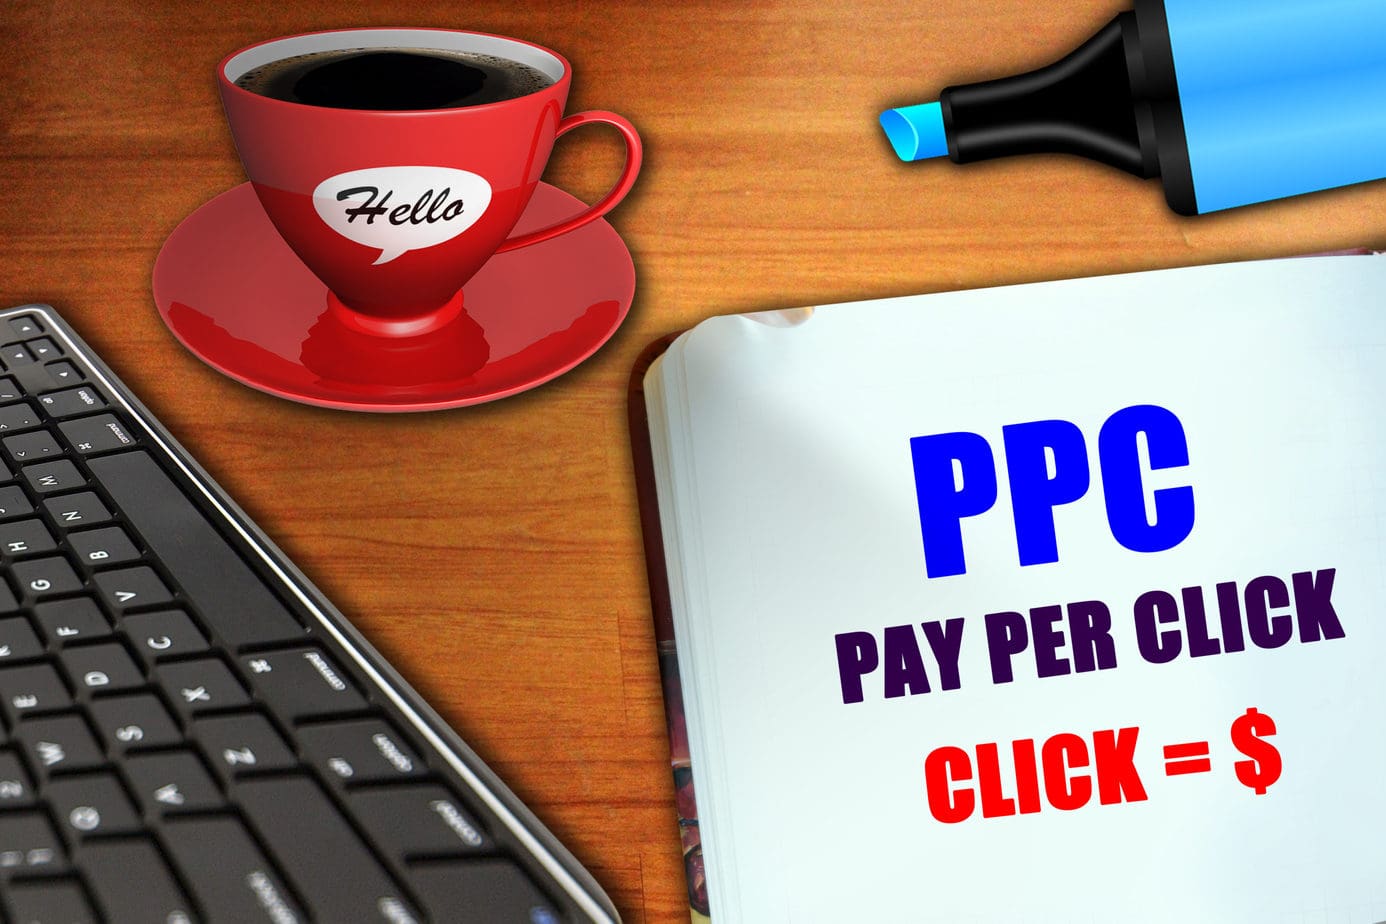 usefulness of PPC, Google adwords, Bing Ads Services